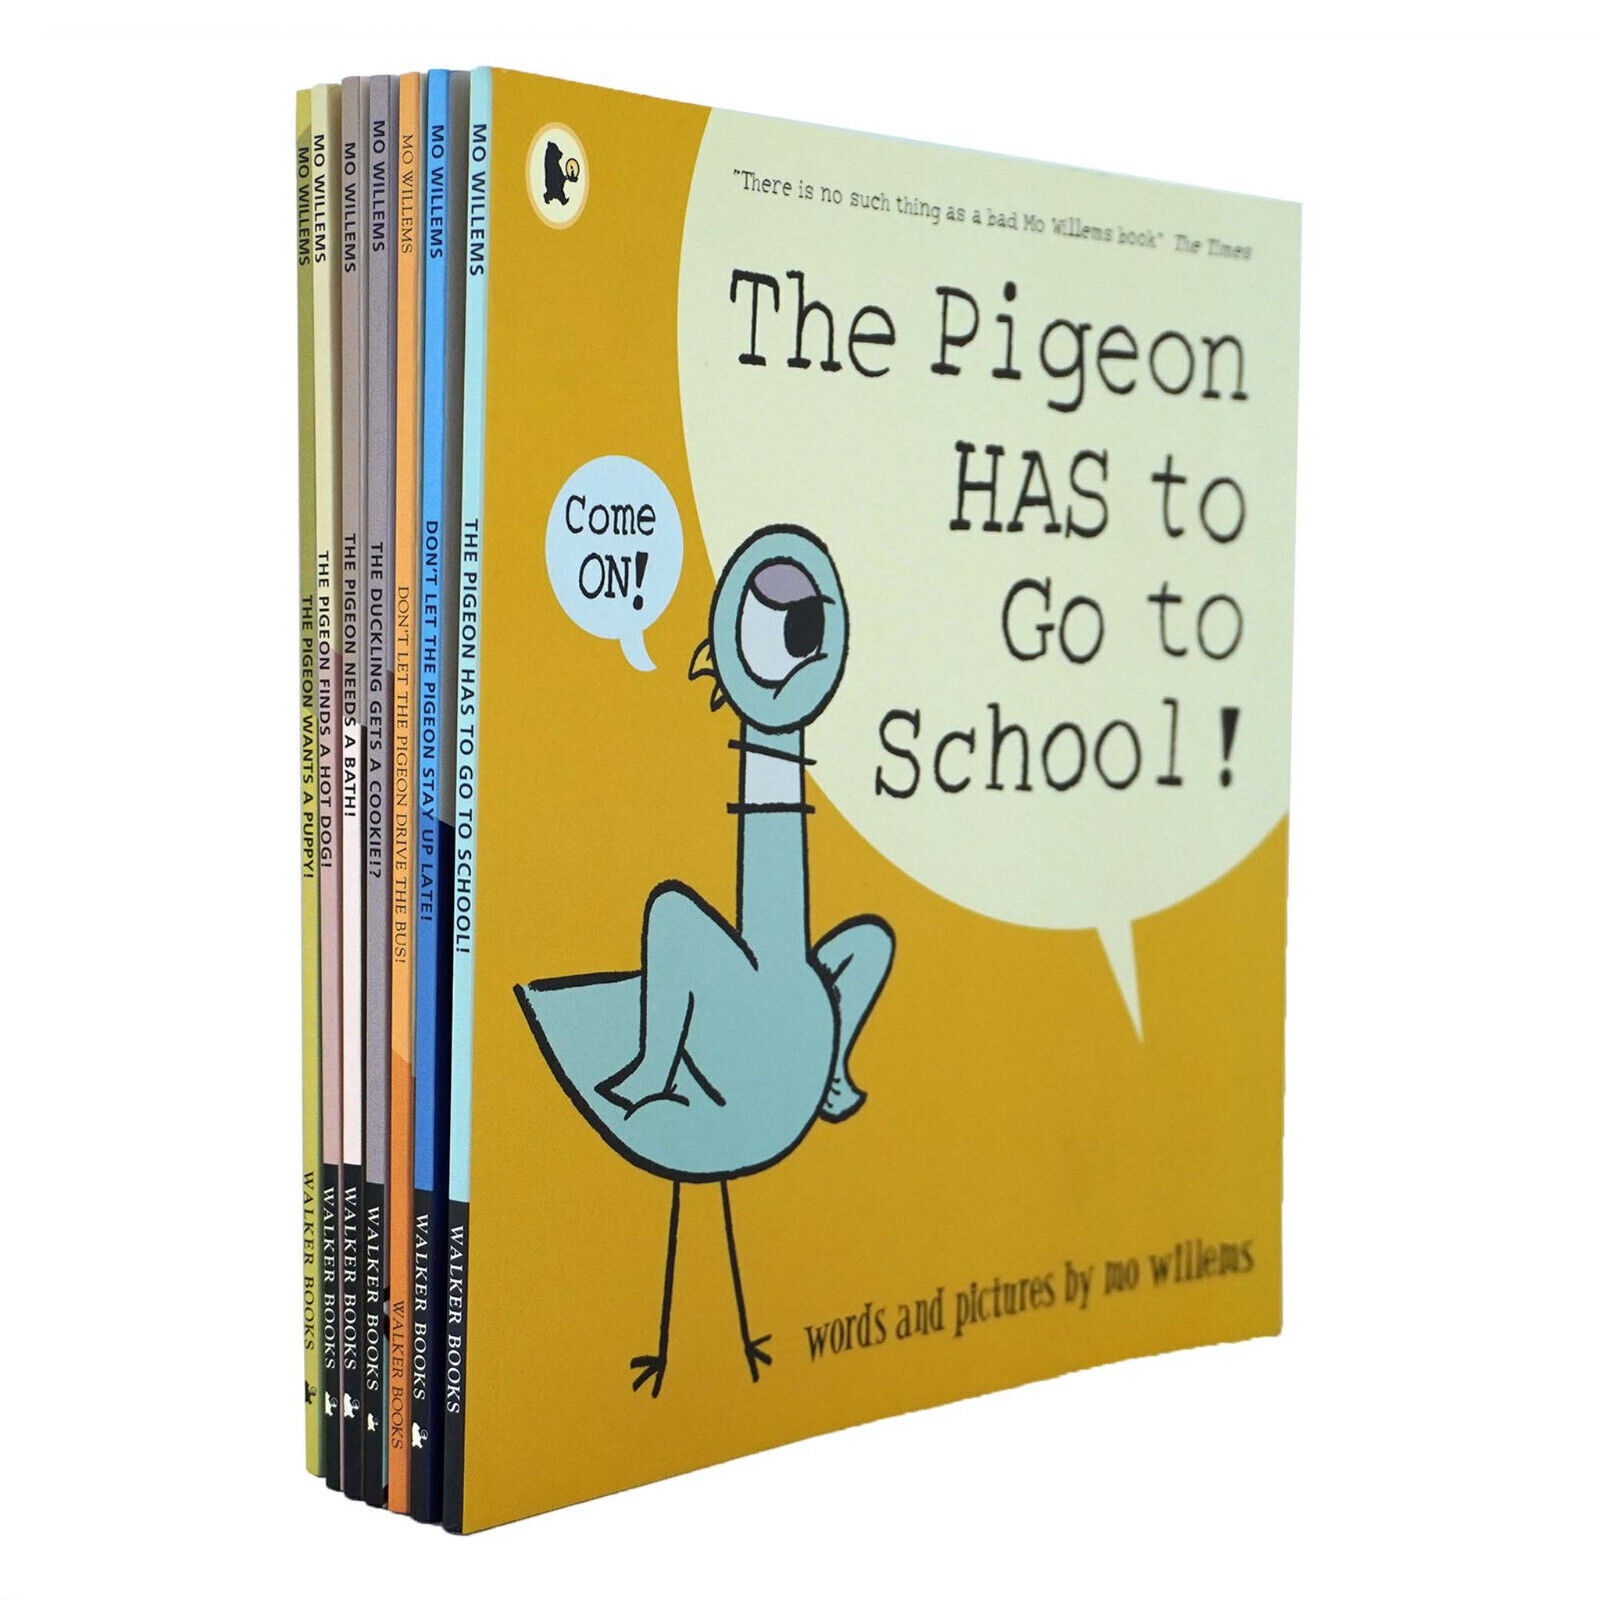 Don't Let the Pigeon Series 7 Books Collection Set by Mo Willems - Age 3-7 - PB